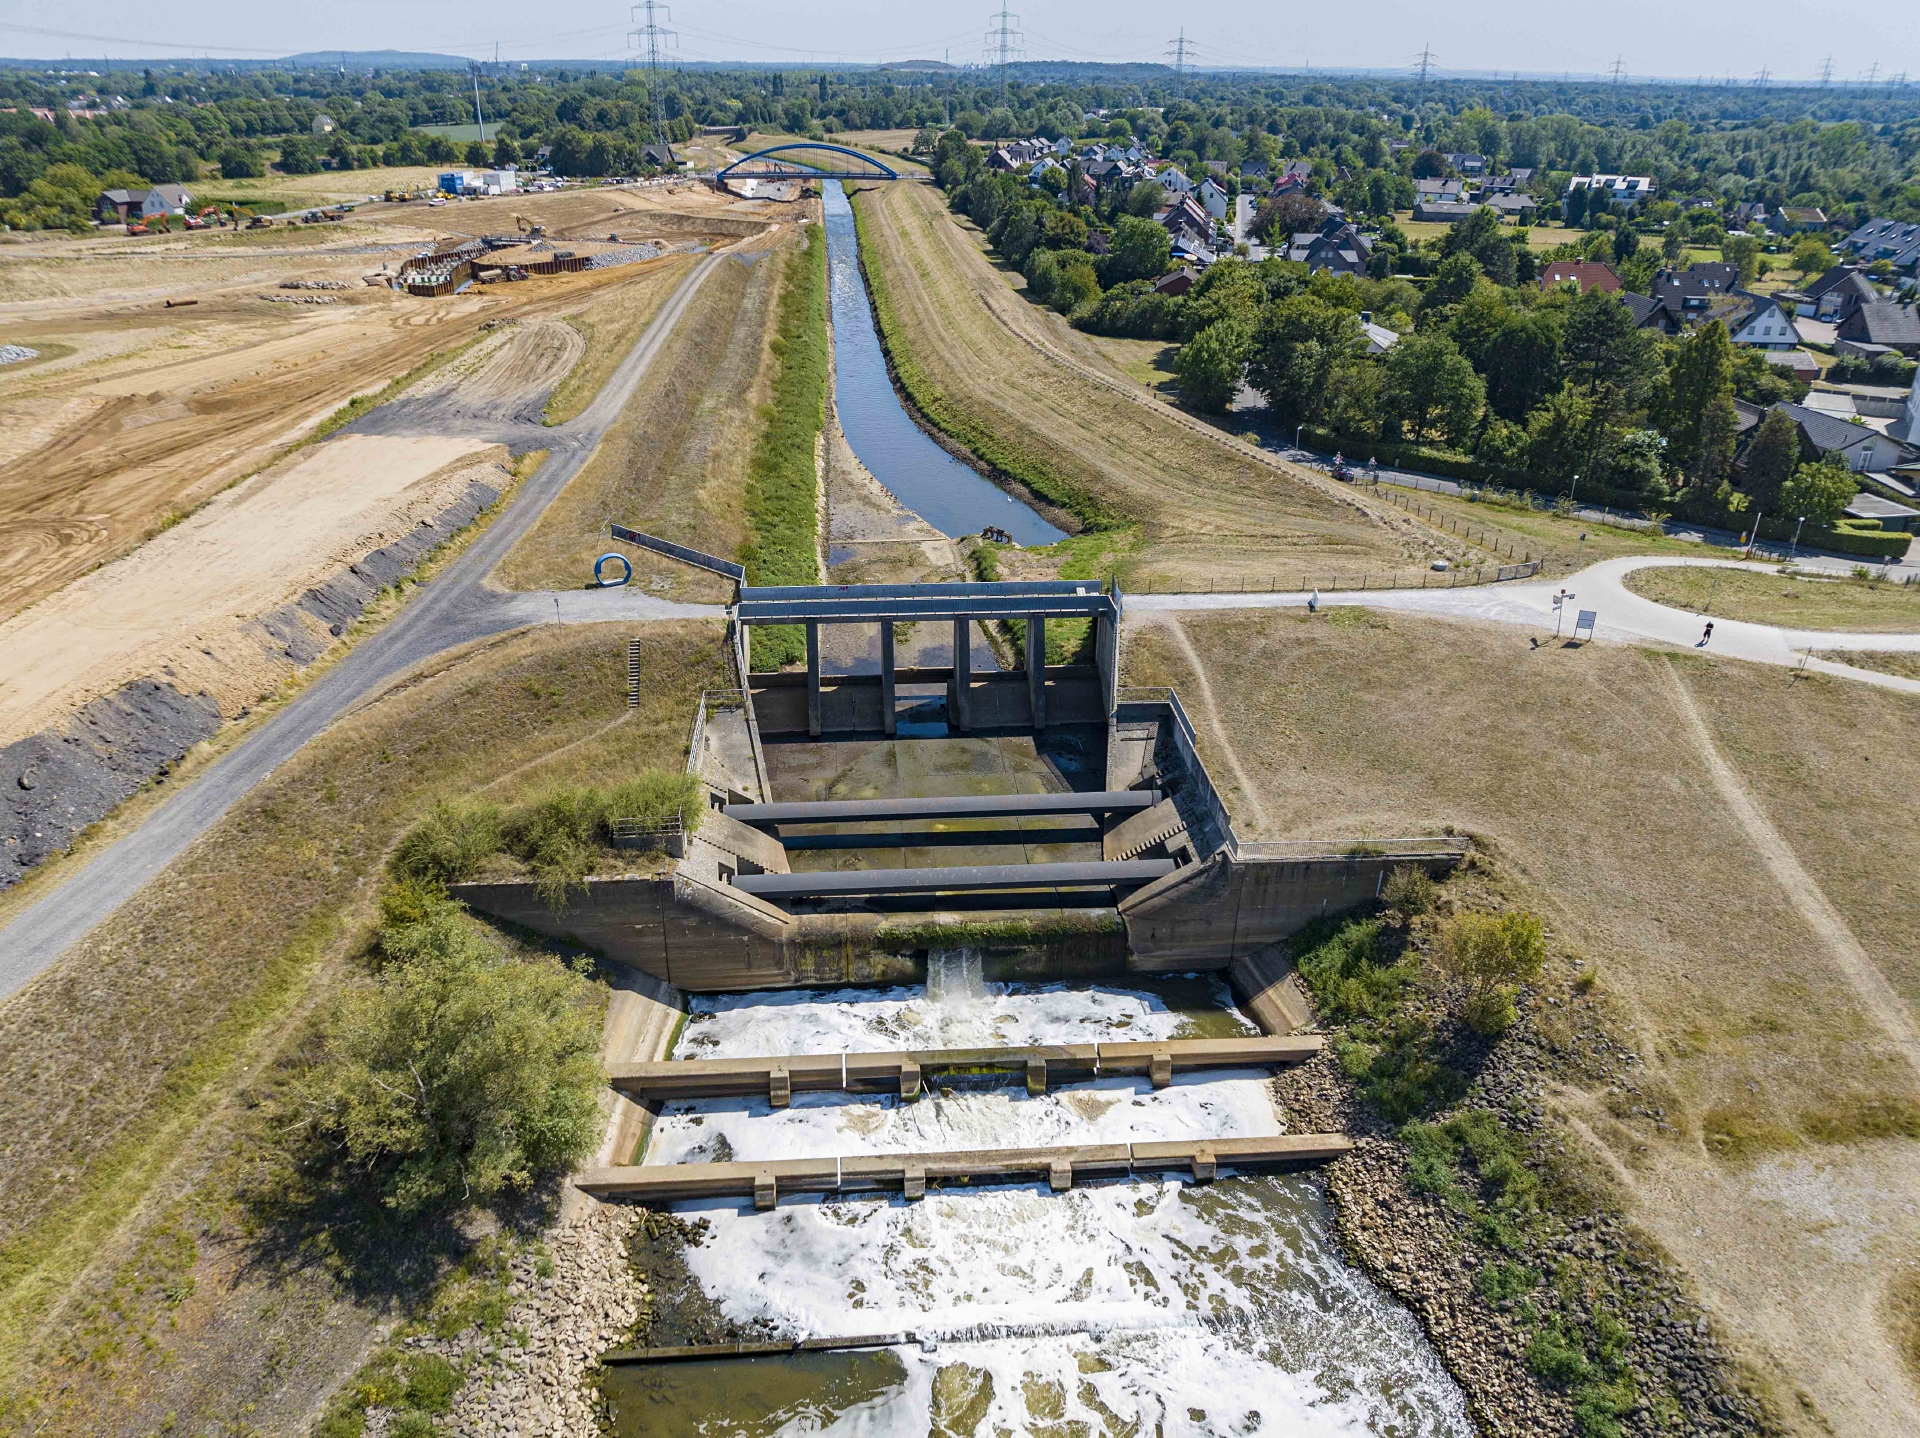 Dam Removal Award 2022: Get to know all the projects!